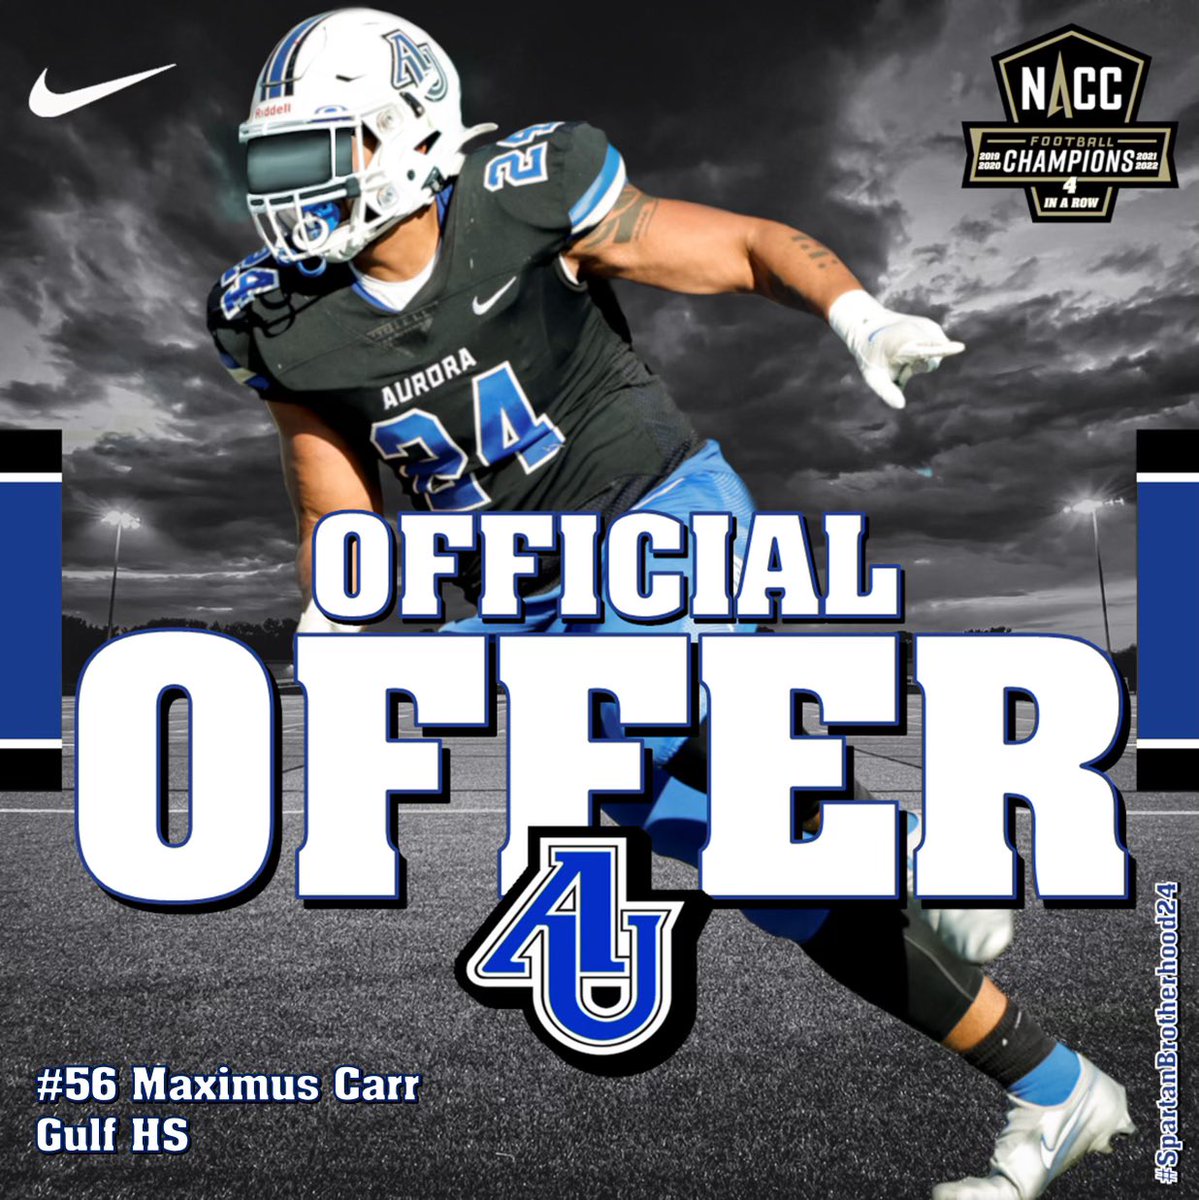 I would like to thank Aurora University for extending my third official collegiate offer. I highly appreciate this opportunity, and hope to see what my future holds. @AU_SpartanFB @DonBeebeNFL @SeanEperjesi @CoachBones27 @GHSbucsfootball @RouteTreePerf